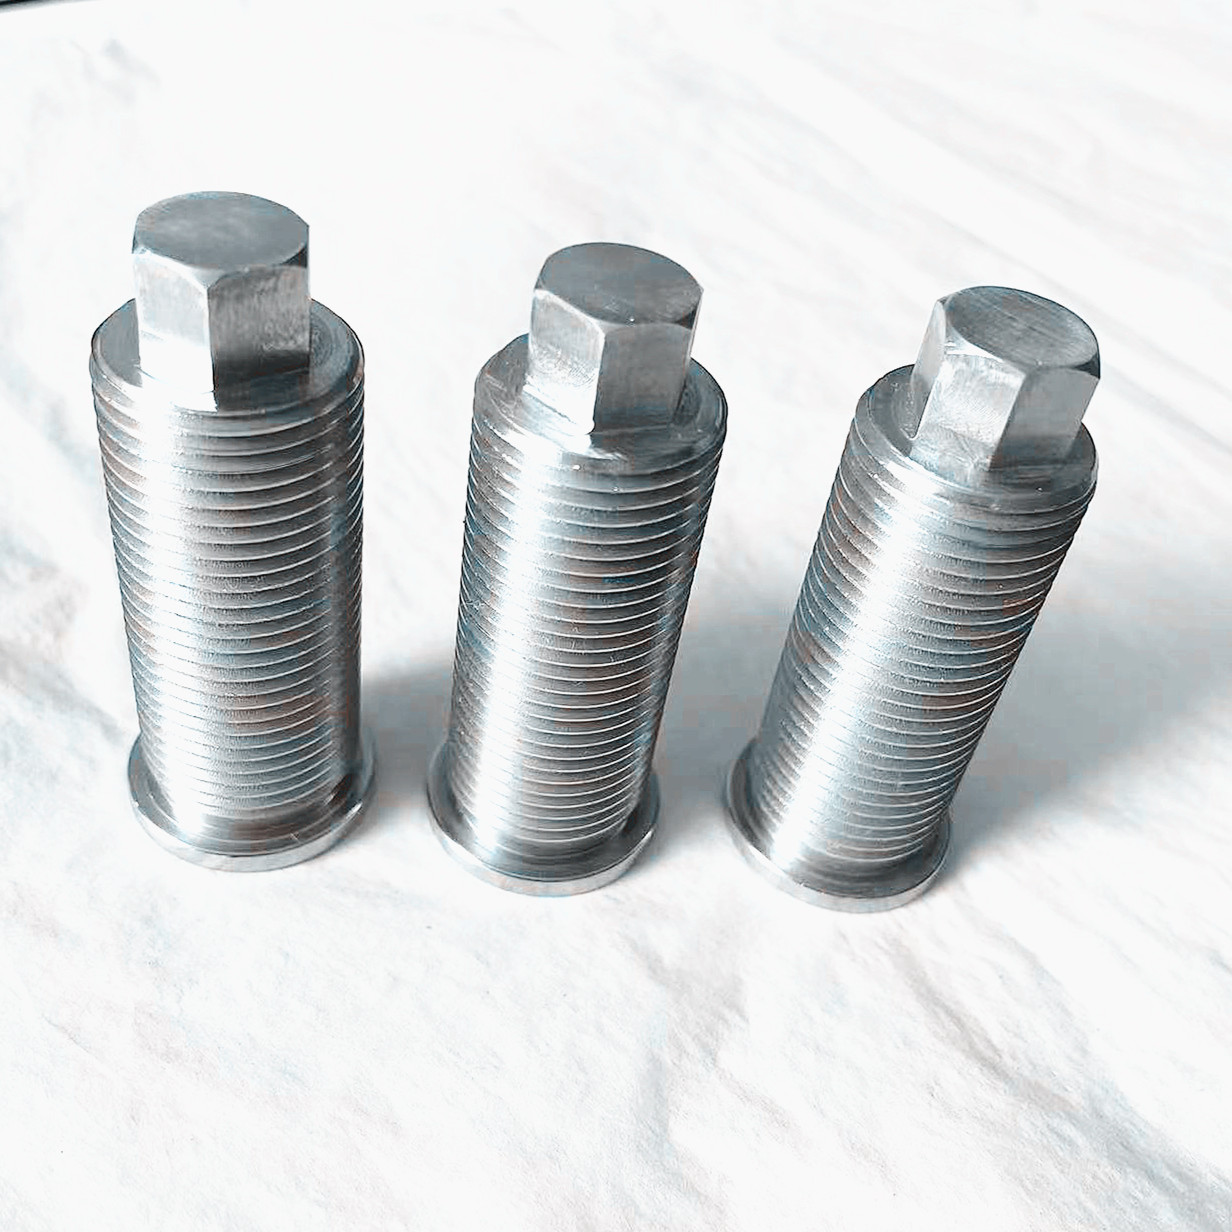 CNC Turning stainless steel threaded linkage adjuster